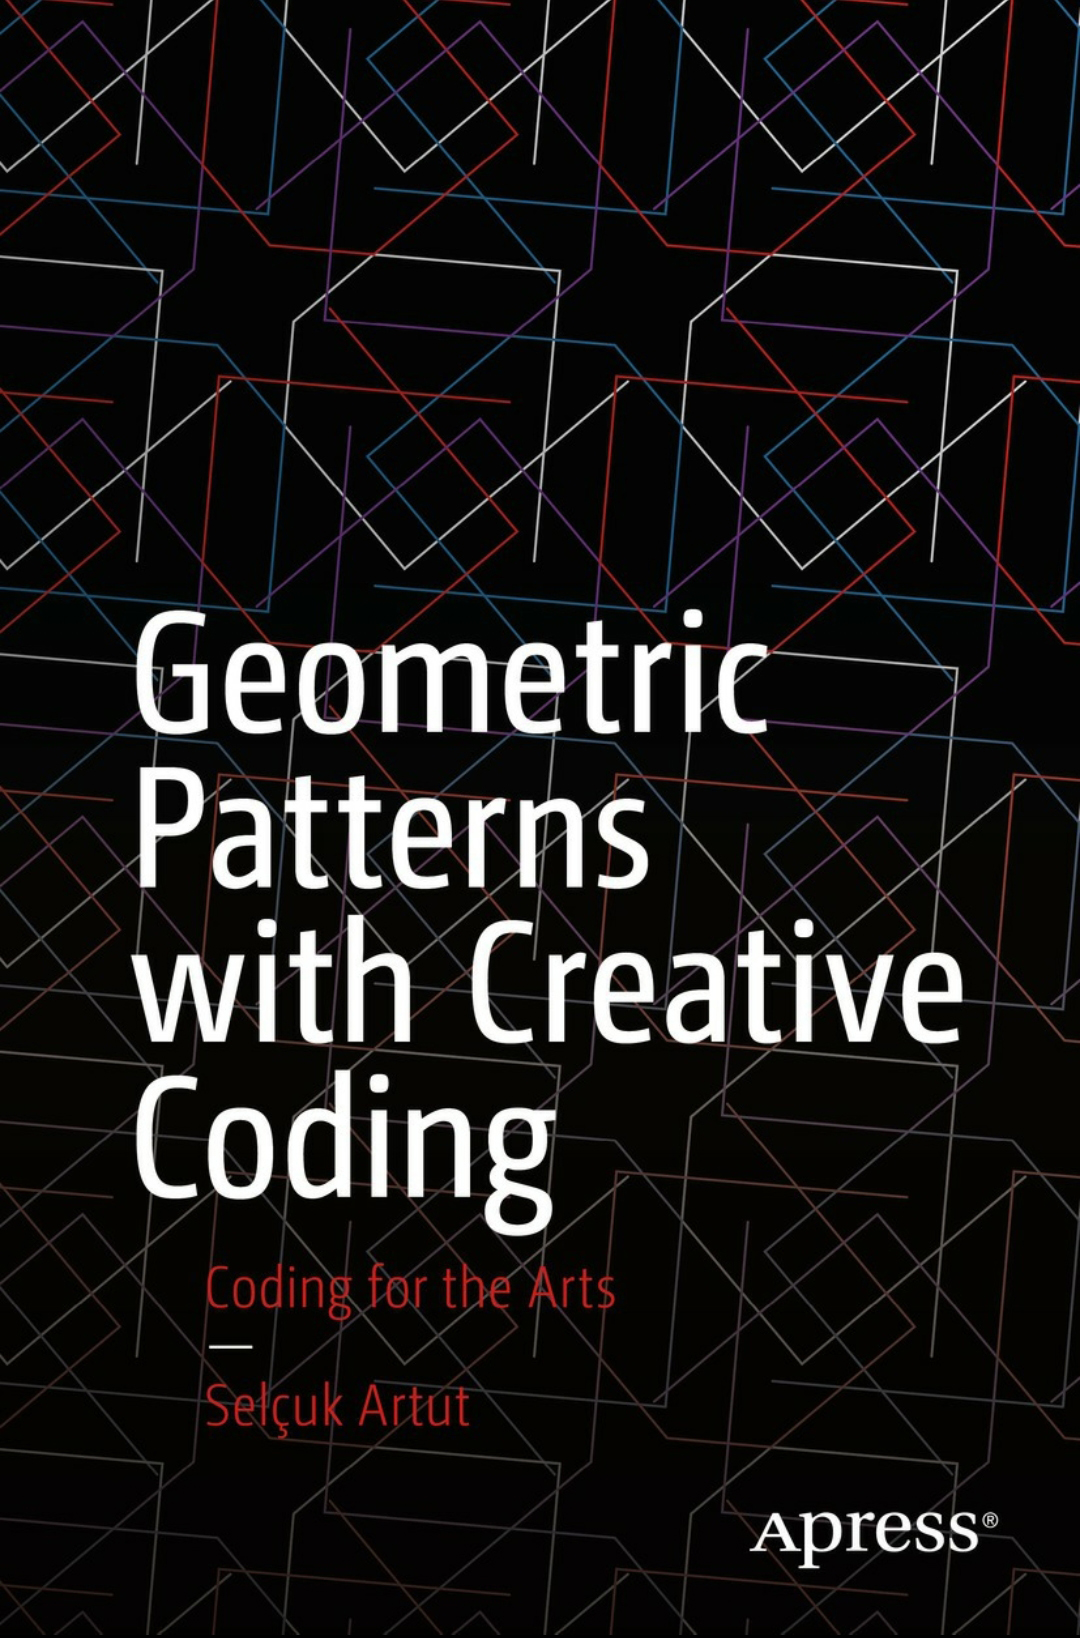 Geometric Patterns with Creative Coding: Coding for the Arts